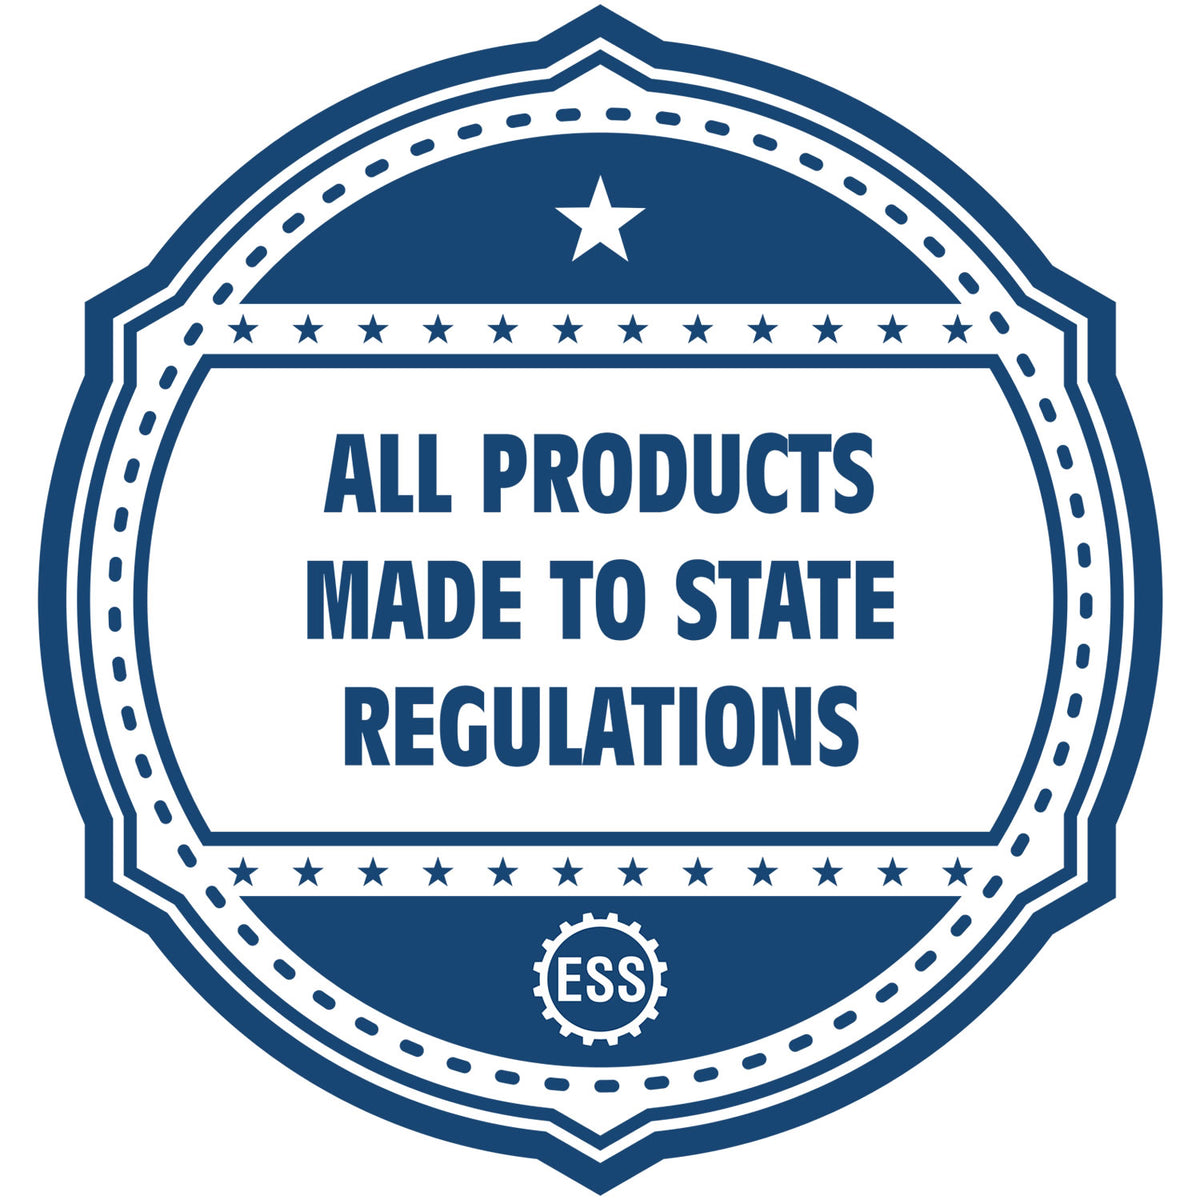 A blue icon or badge for the Gift Nevada Engineer Seal showing that this product is made in compliance with state regulations.